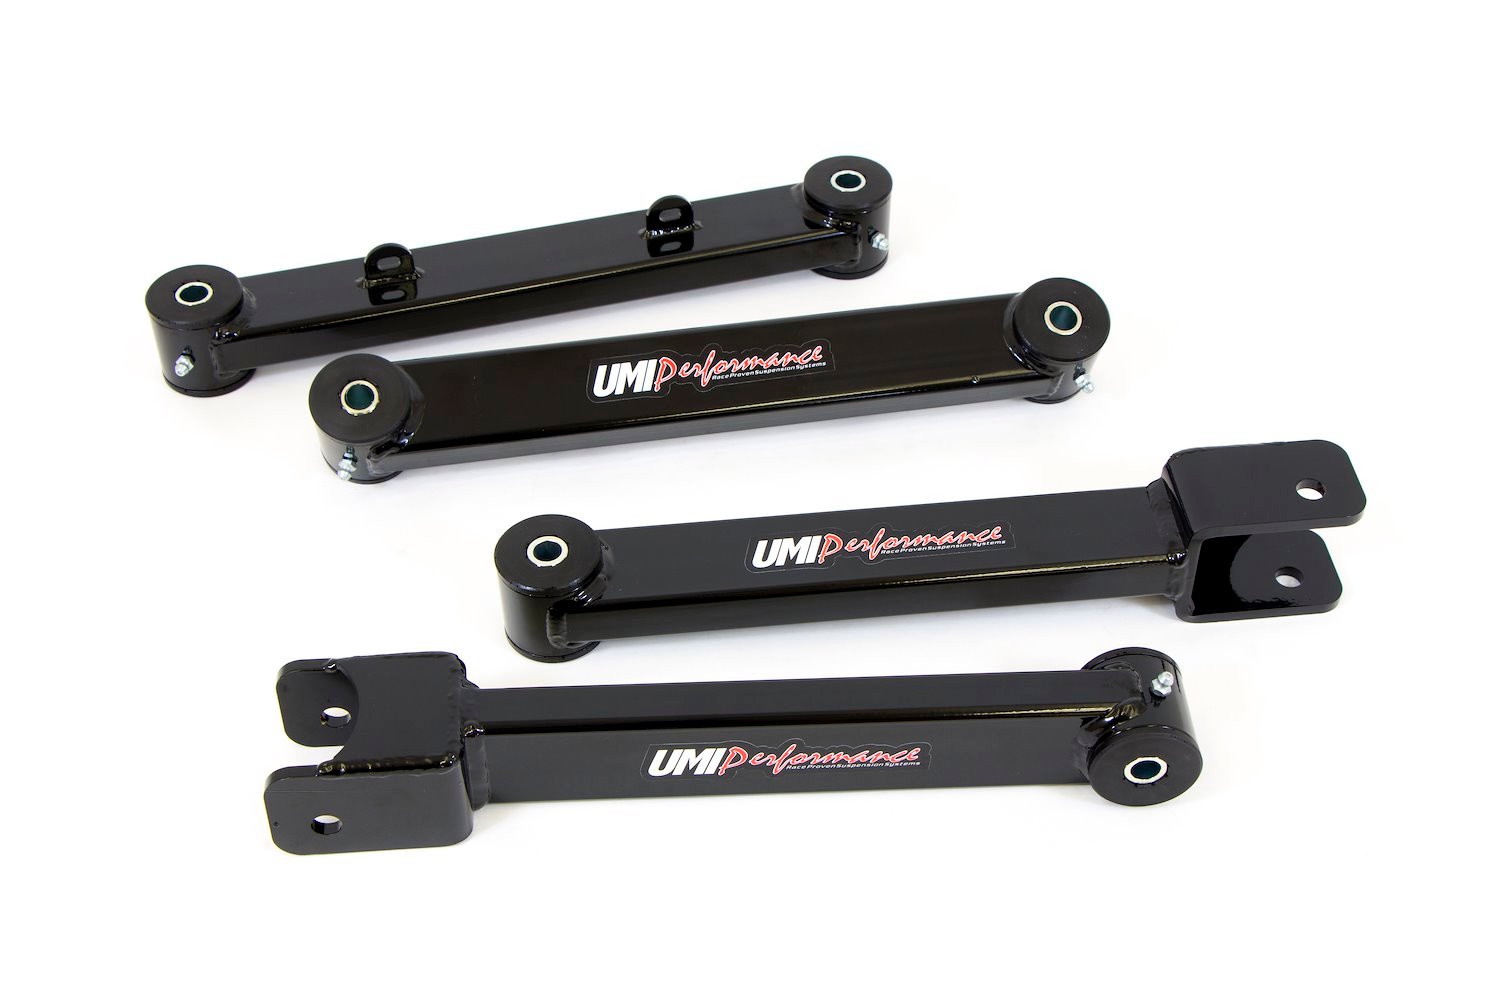 Rear suspension kit from UMI includes heavy duty rear trailing arms and rear toe rod arms for your 5